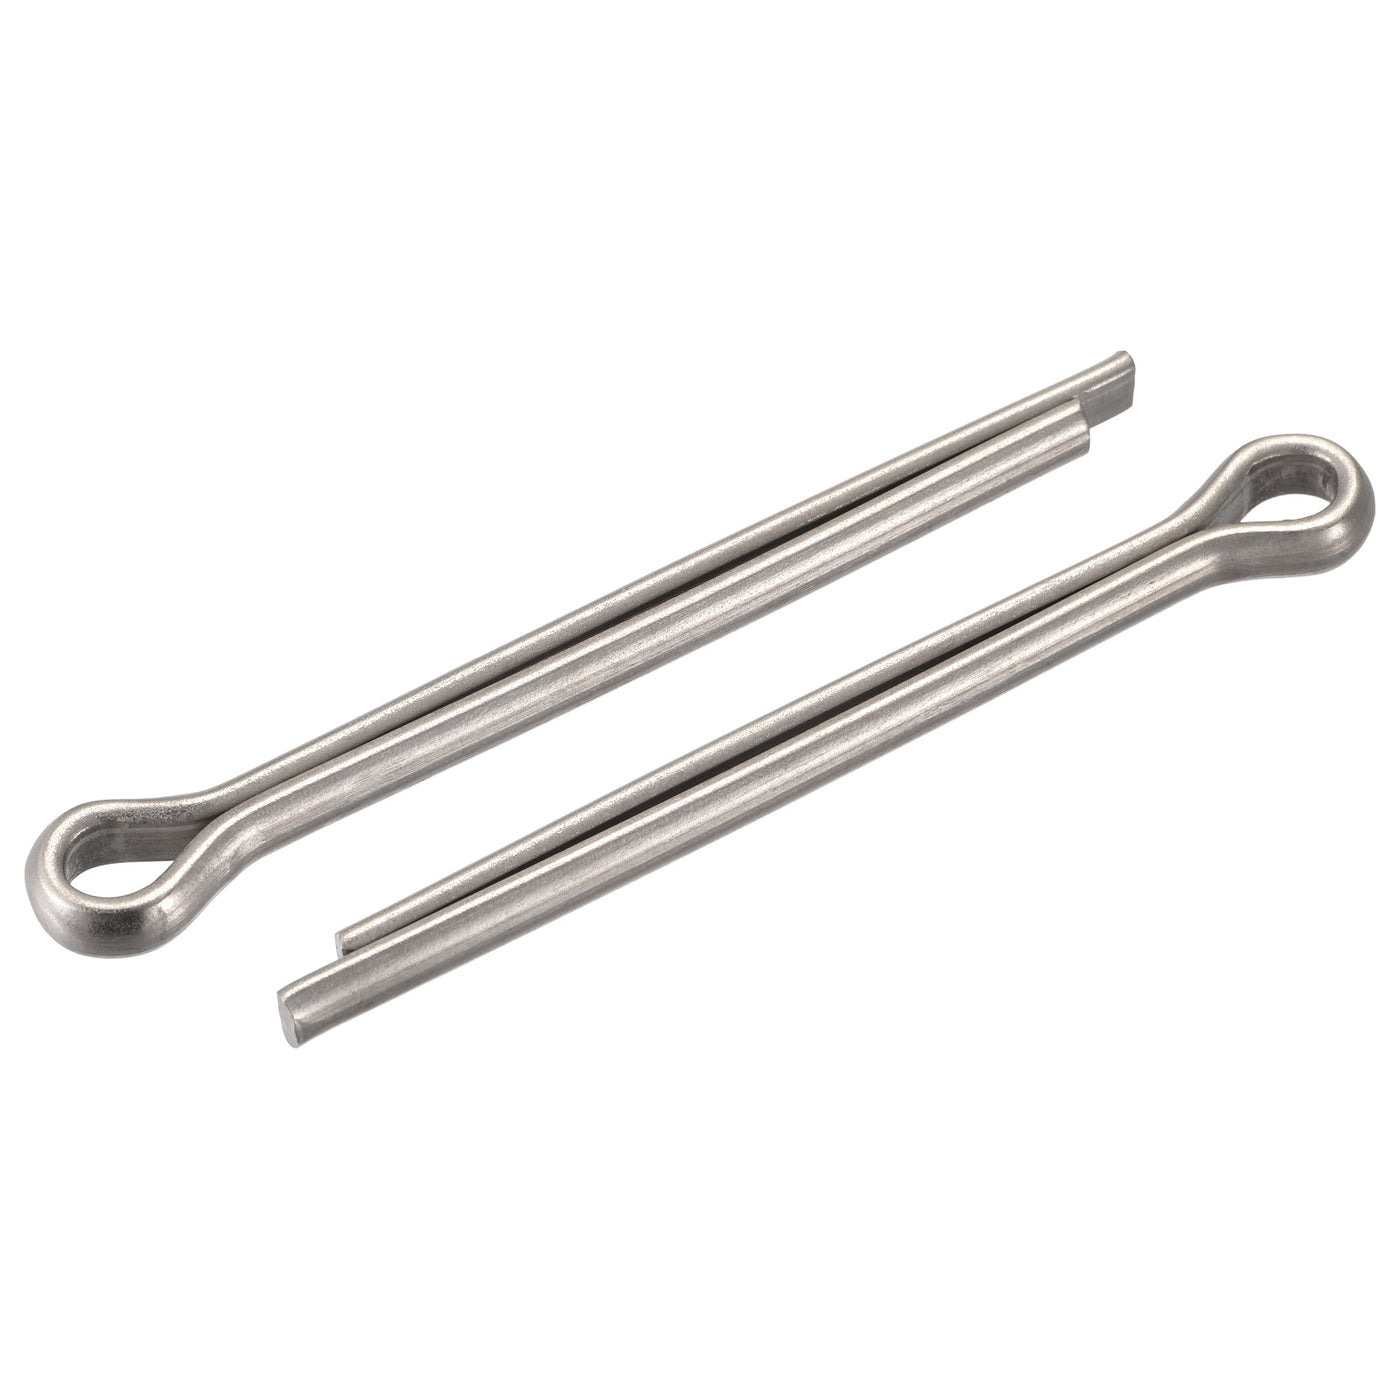 uxcell Uxcell Cotter Pins, 10mm x 100mm 304 Stainless Steel Clip Fastener Fitting for Automotive, Mechanics, Silver Tone, 2Pcs